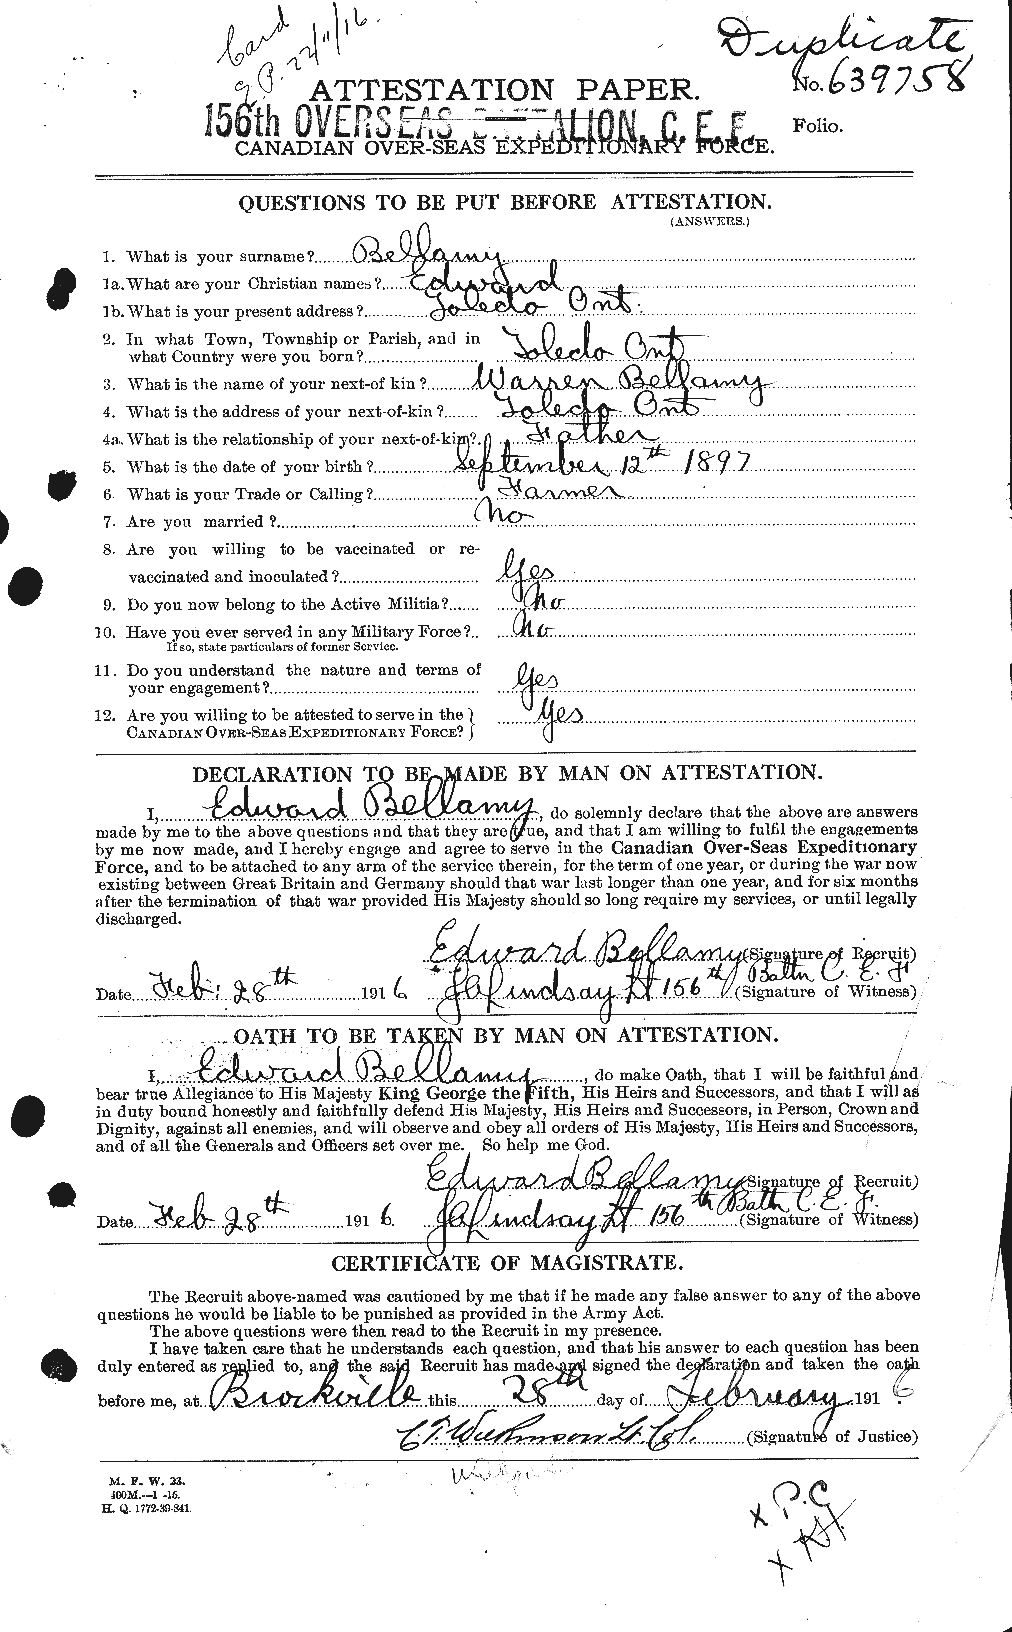 Personnel Records of the First World War - CEF 234970a